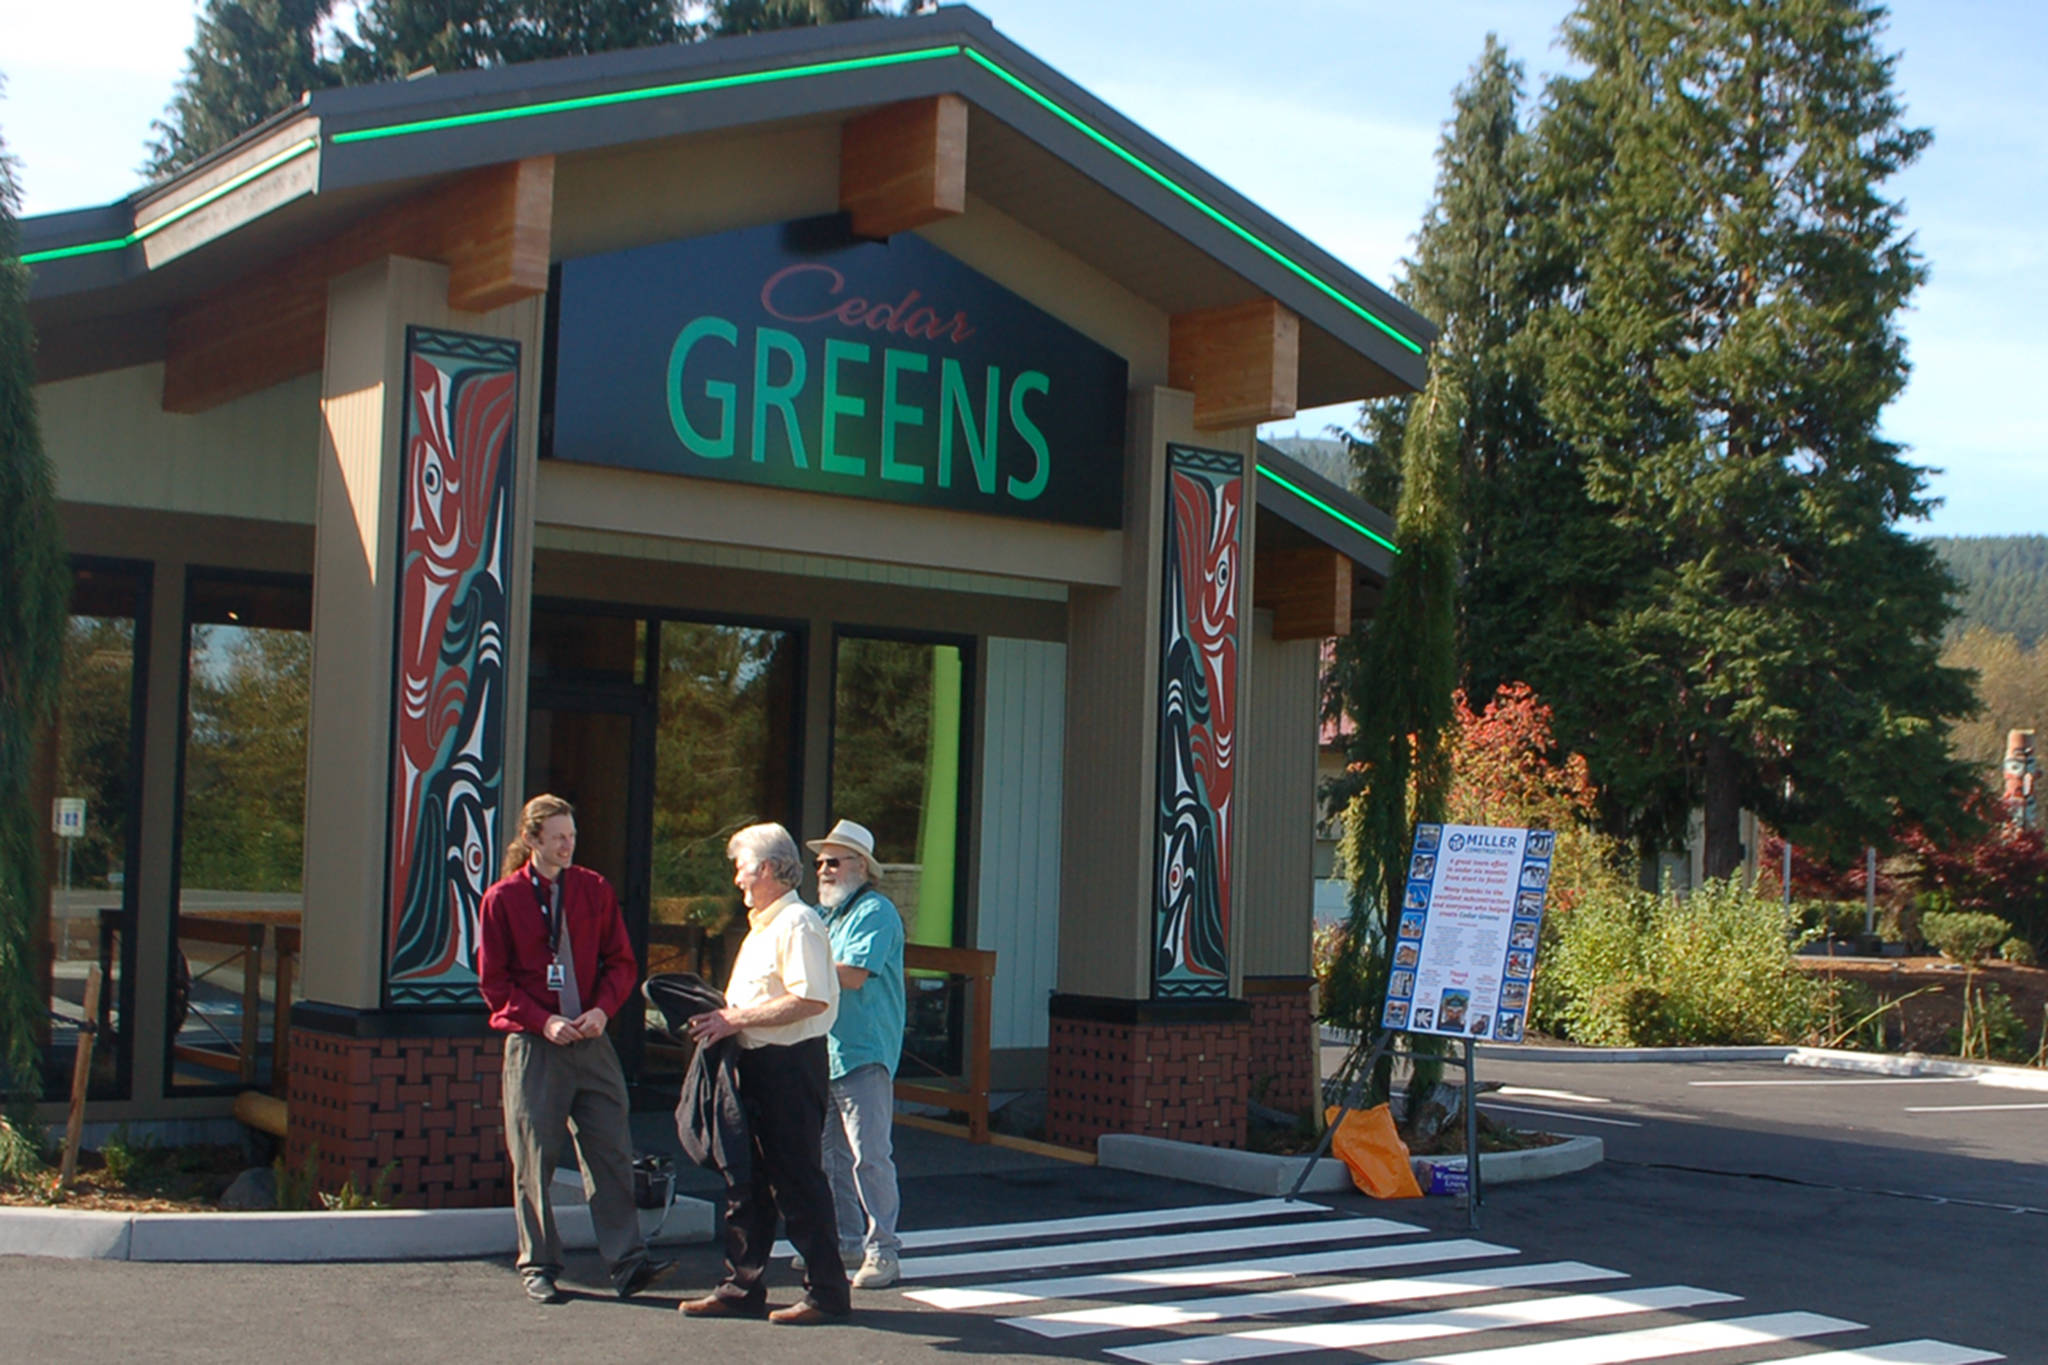 Cedar Greens general operations manager Mike Smith, left, speaks with two attendees of the grand opening for the Jamestown S’Klallam Tribe’s new cannabis dispensary store. Sequim Gazette photo by Conor Dowley